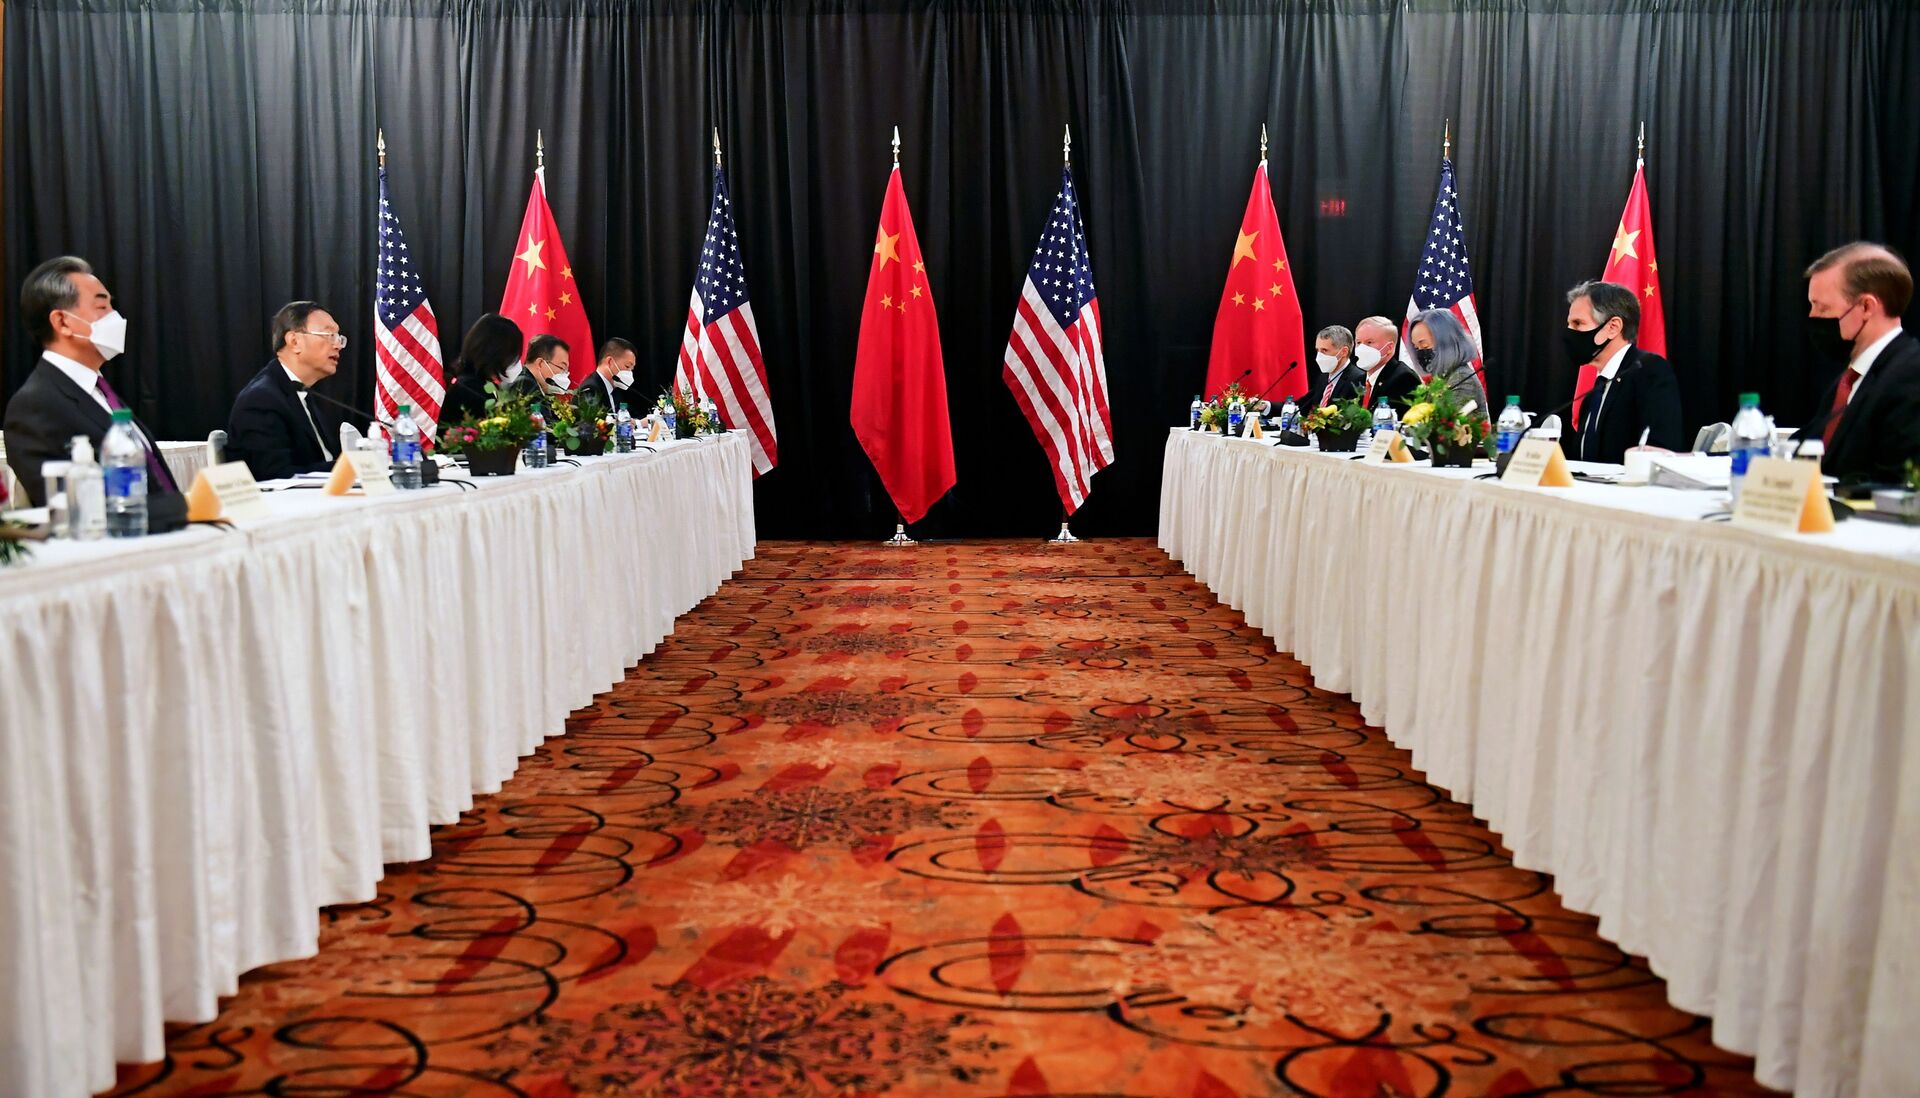 U.S. Secretary of State Antony Blinken (2nd R), joined by National Security Advisor Jake Sullivan (R), speaks while facing Yang Jiechi (2nd L), director of the Central Foreign Affairs Commission Office, and Wang Yi (L), China's State Councilor and Foreign Minister, at the opening session of US-China talks at the Captain Cook Hotel in Anchorage, Alaska, U.S. March 18, 2021 - Sputnik International, 1920, 11.11.2021